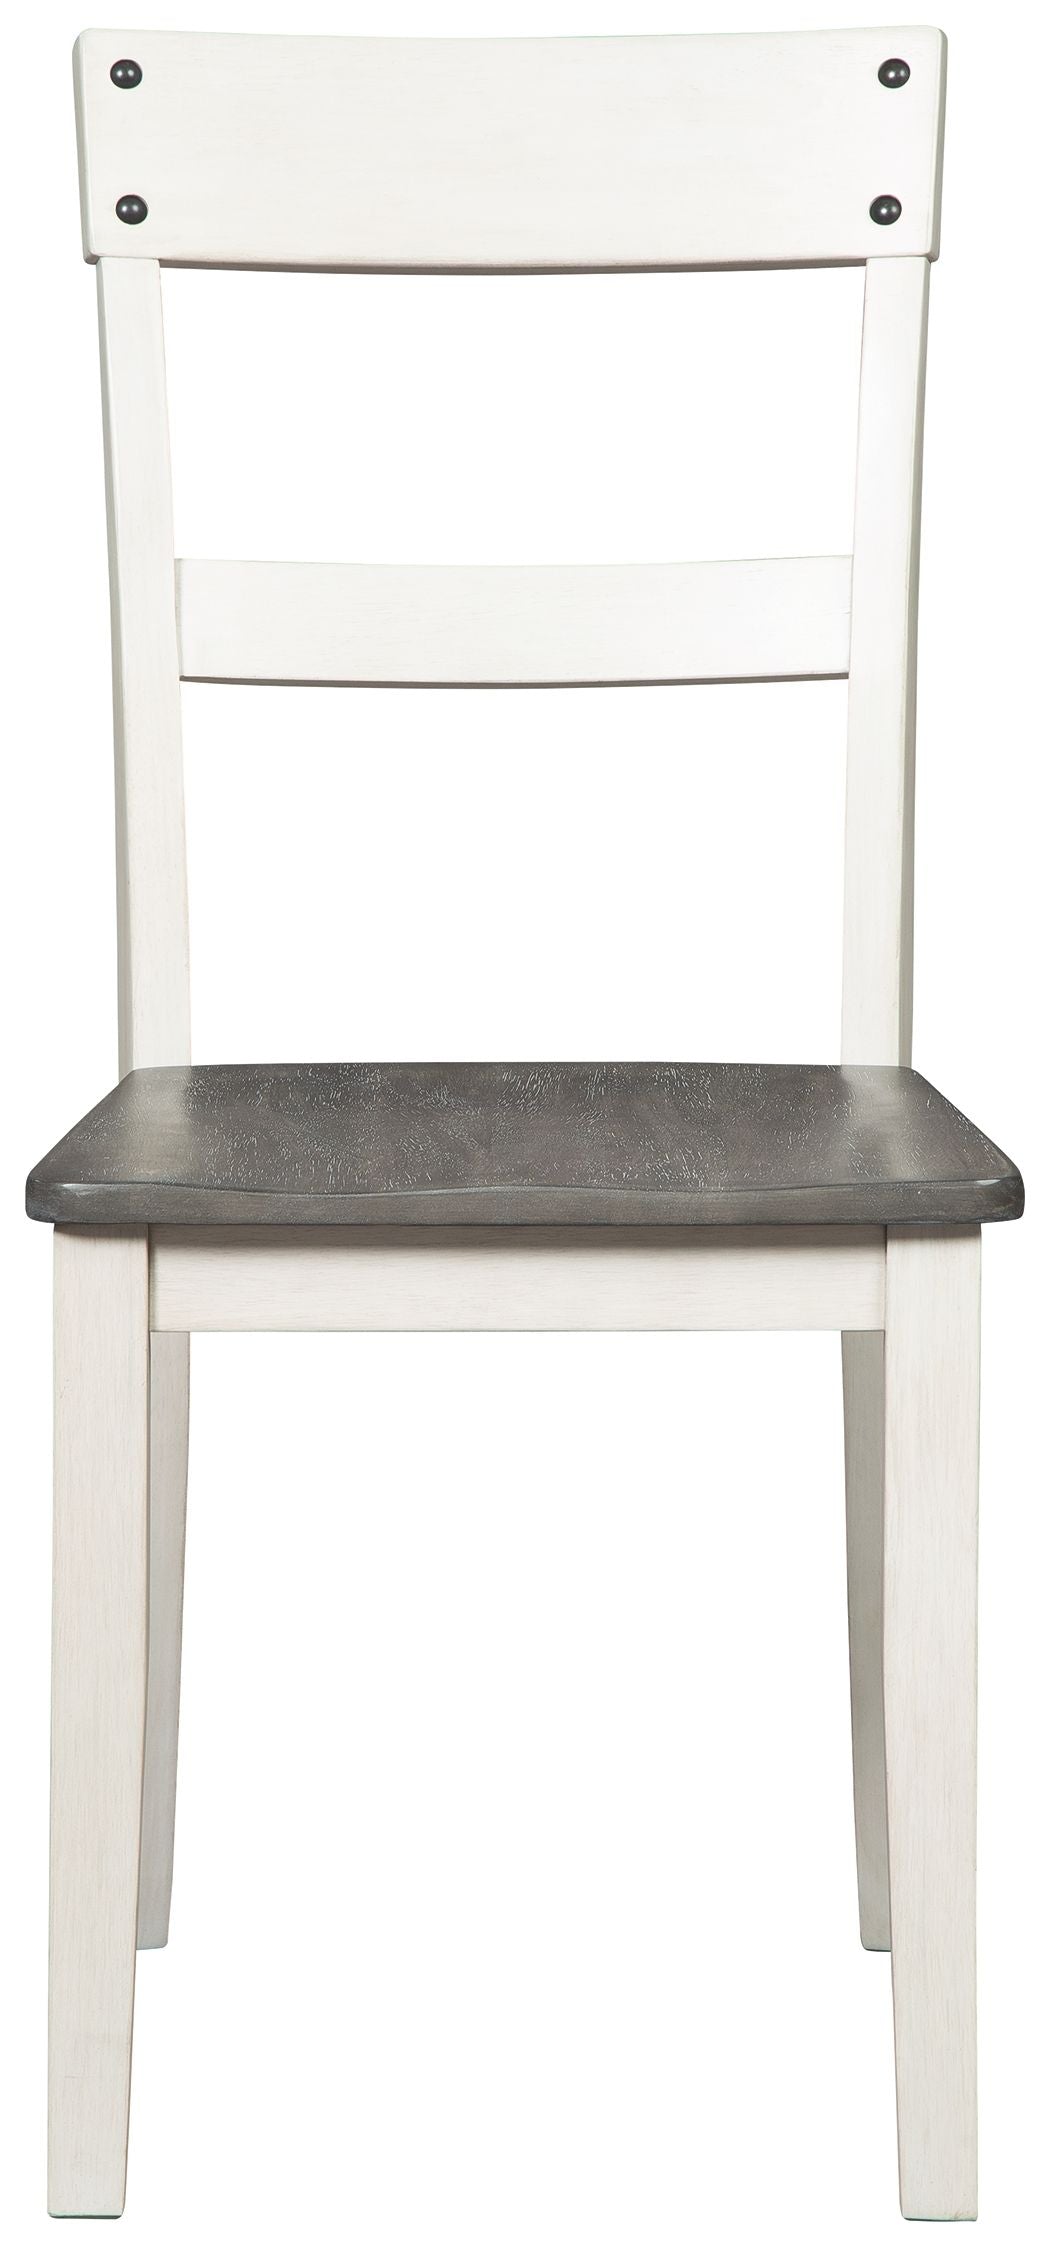 Nelling - White / Brown / Beige - Dining Room Side Chair (Set of 2)